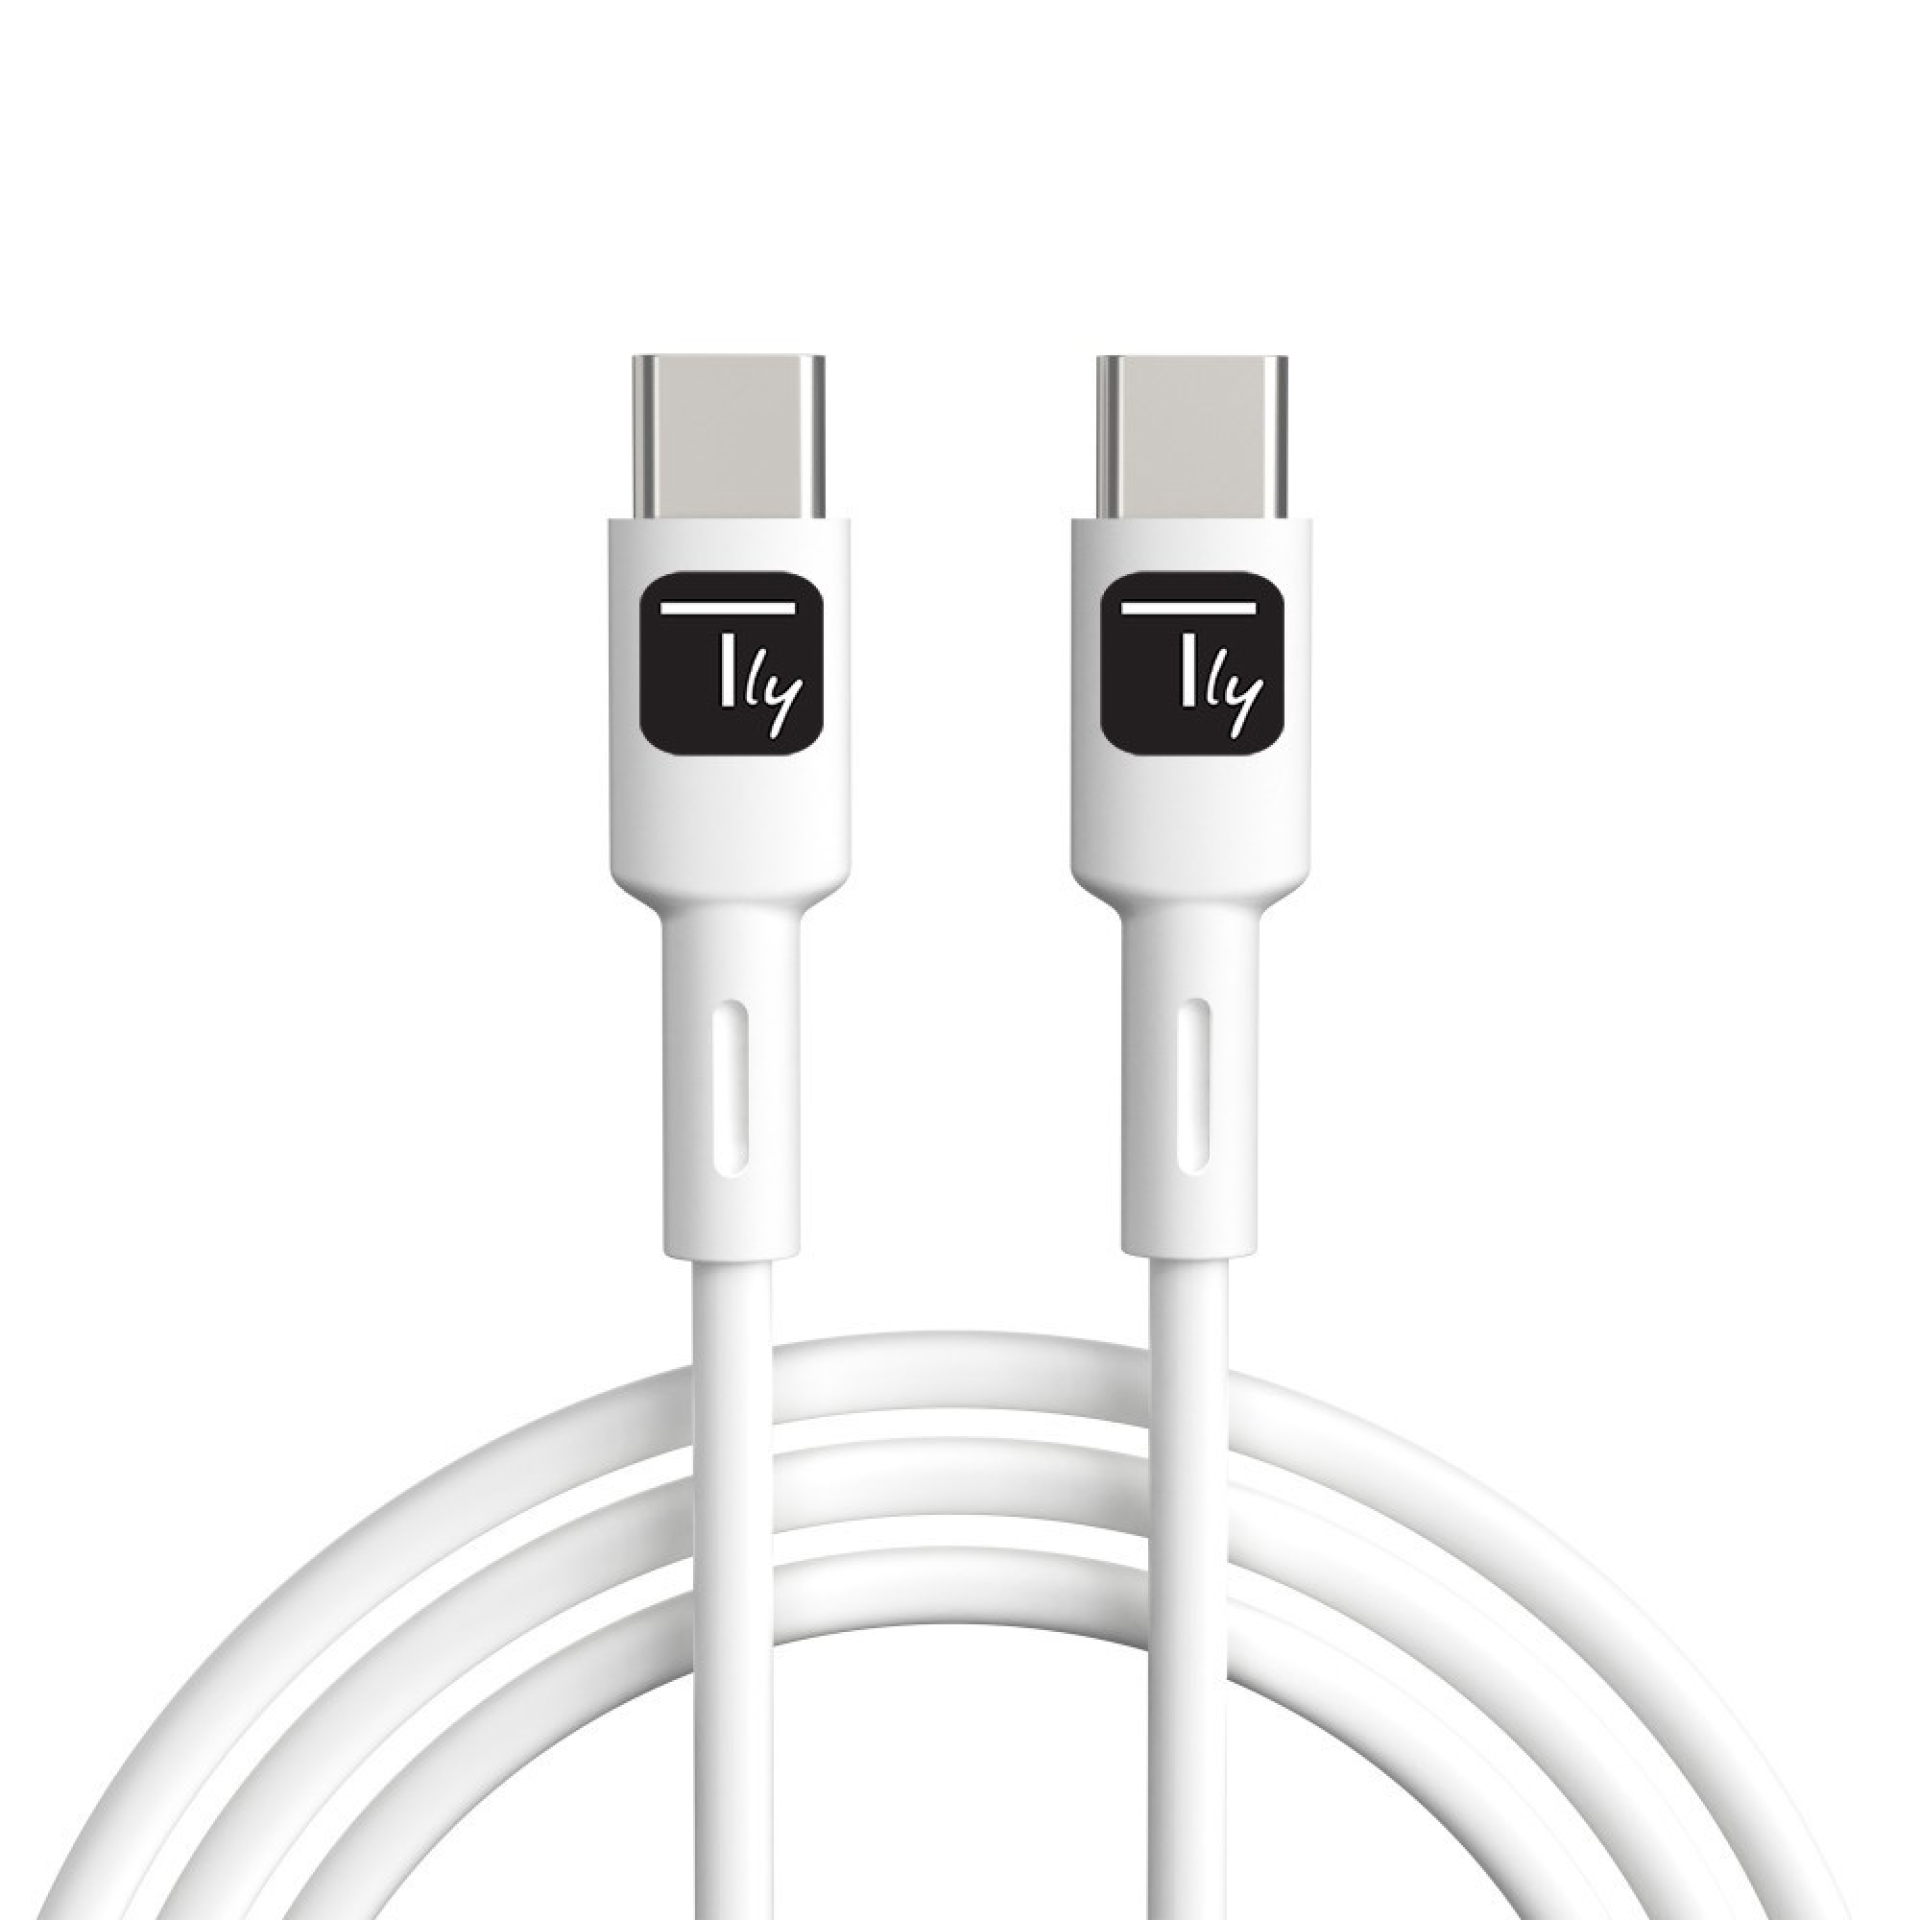 Techly USB-C male 2.0 cable, 1m white